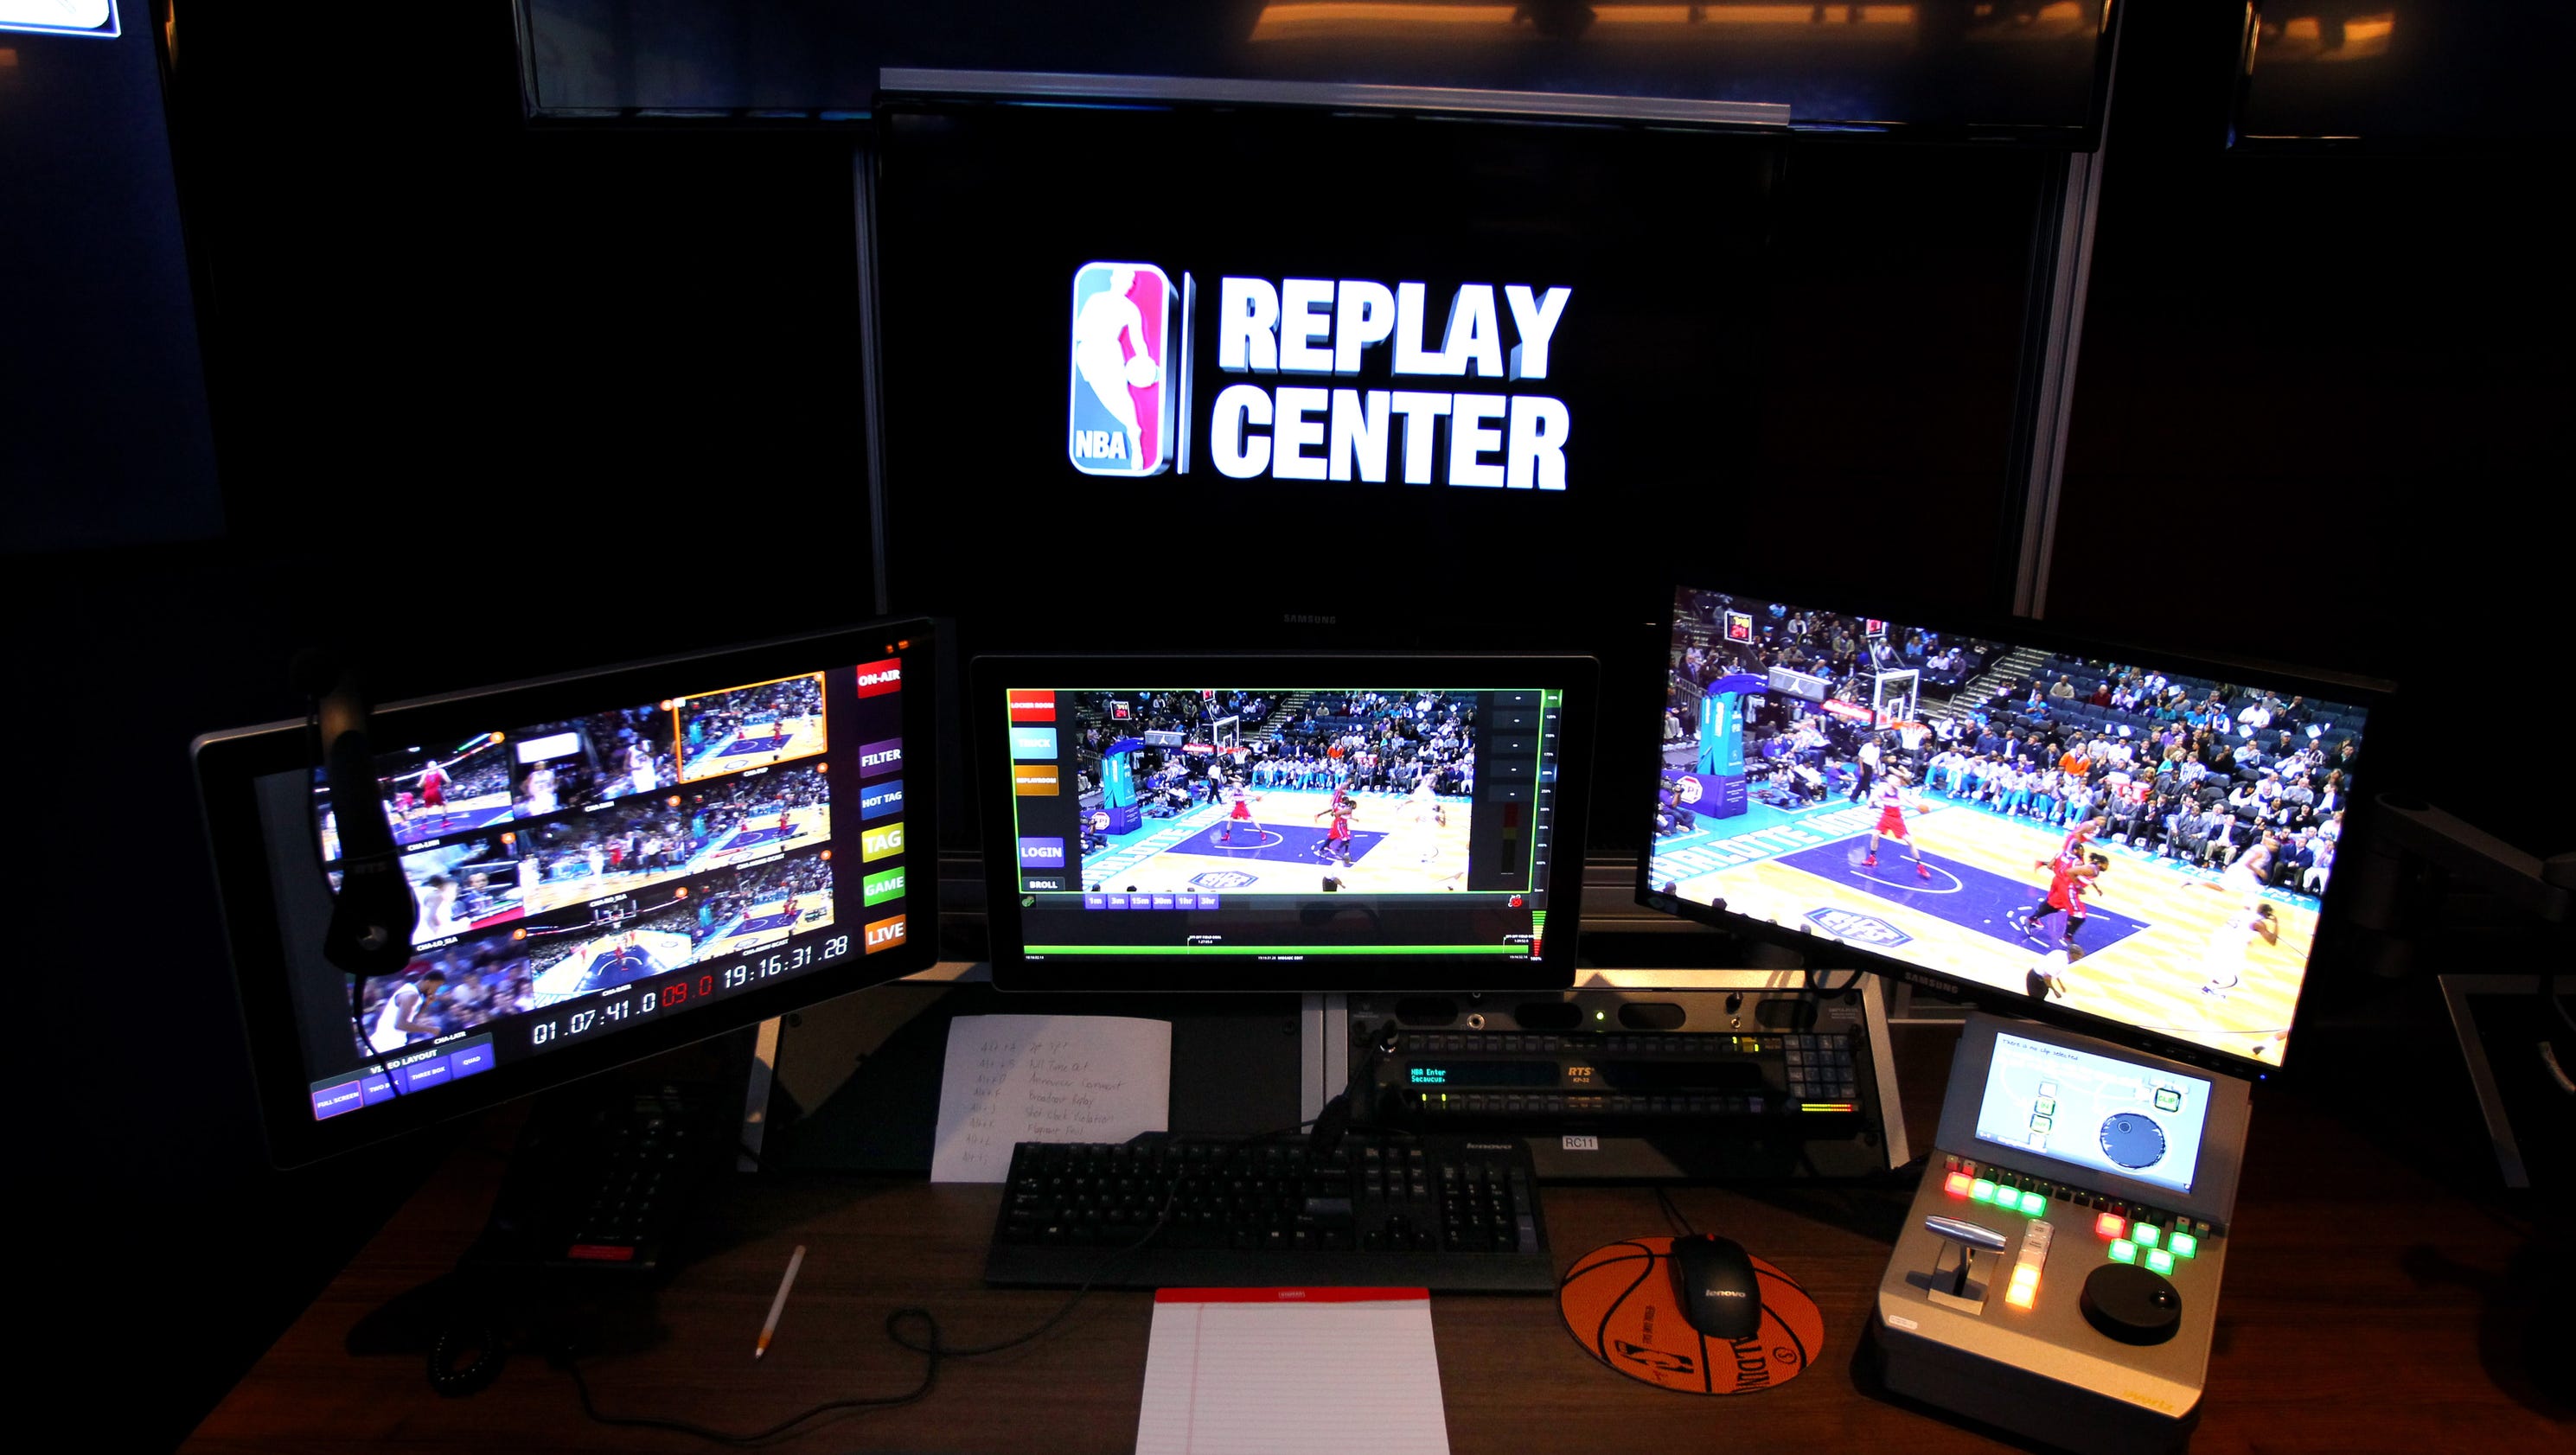 NBA announces changes to pick up pace of instant replays3200 x 1680